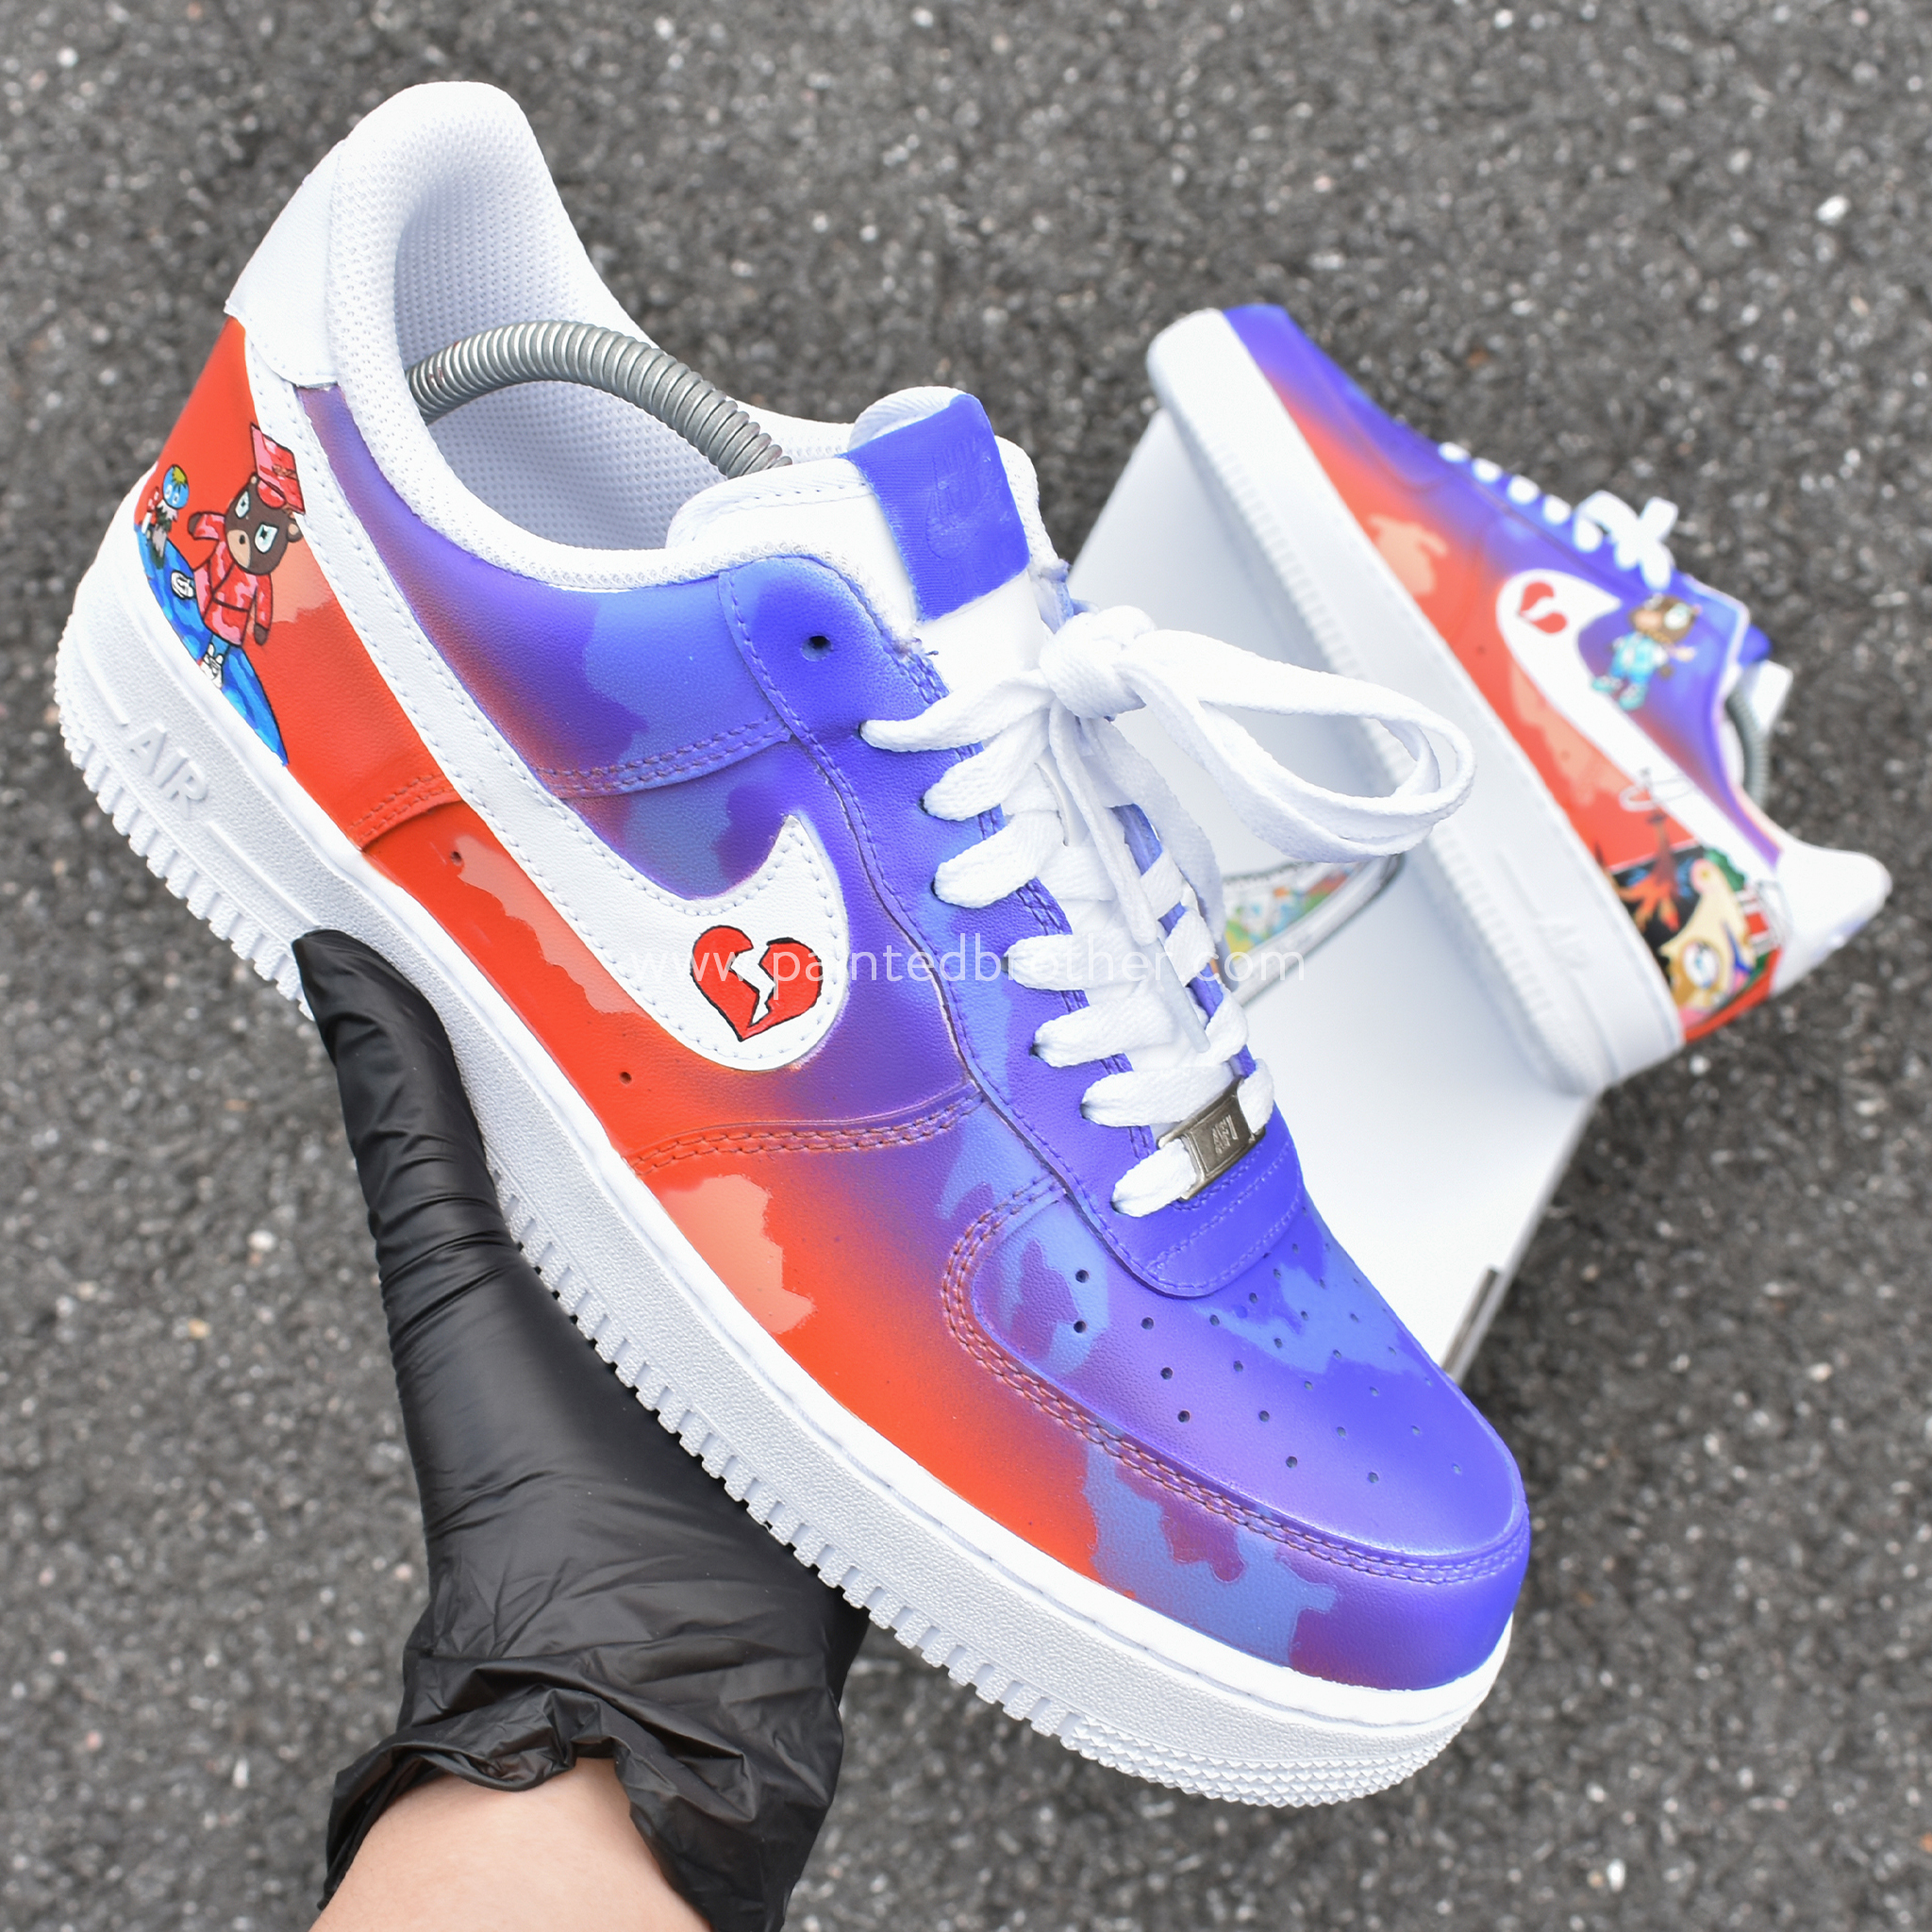 Custom Painted Nike Air Force 1 Sinful Colors - Available to